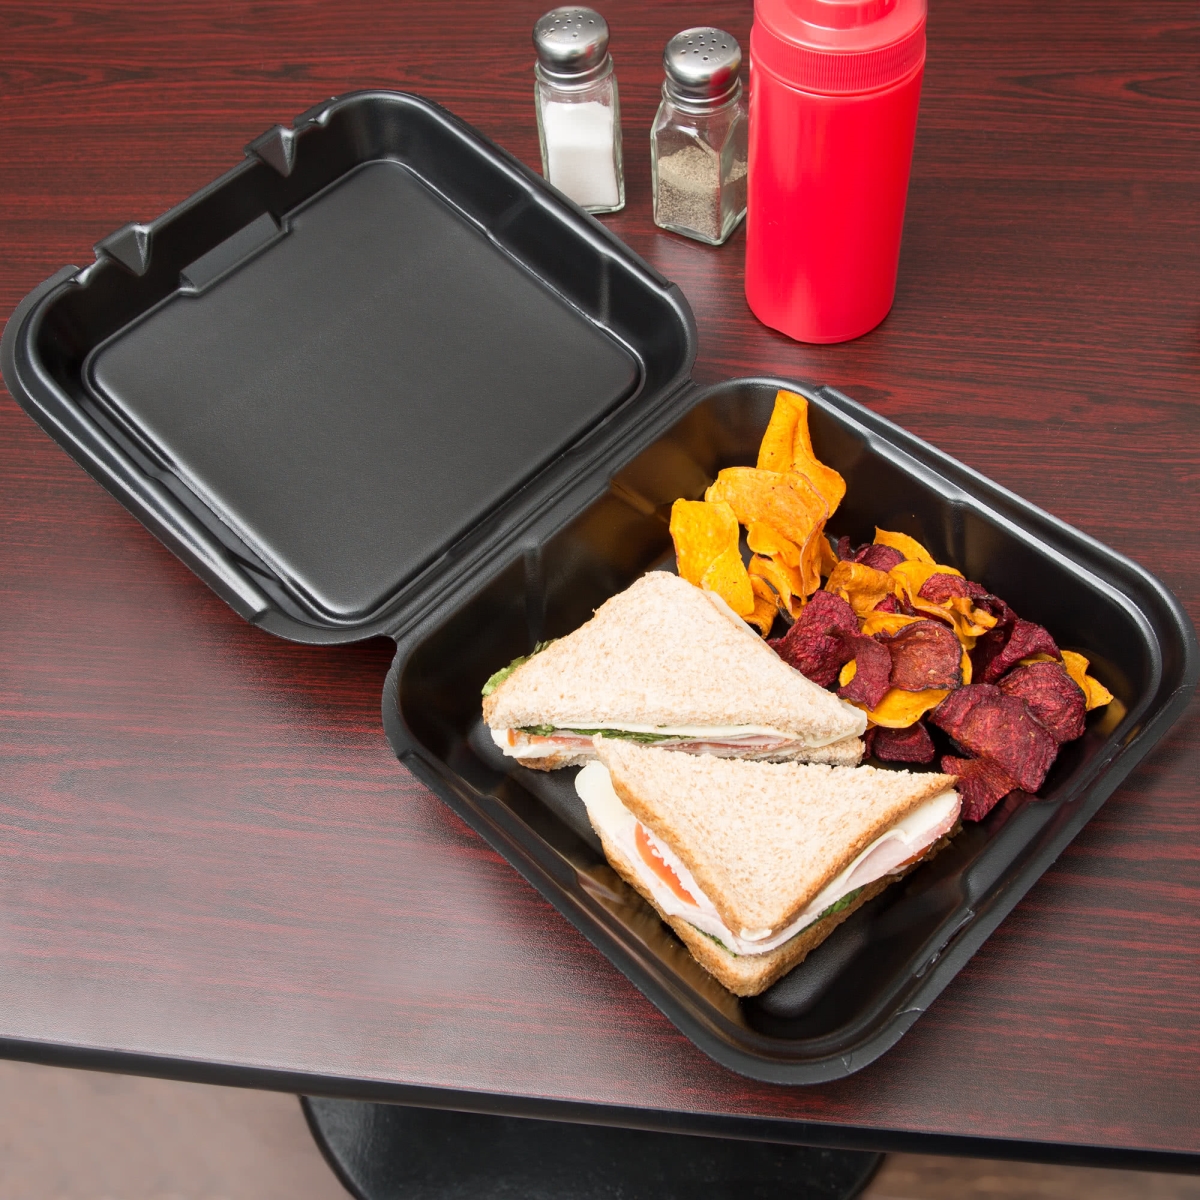 Foam Hinged Lid Container - Black